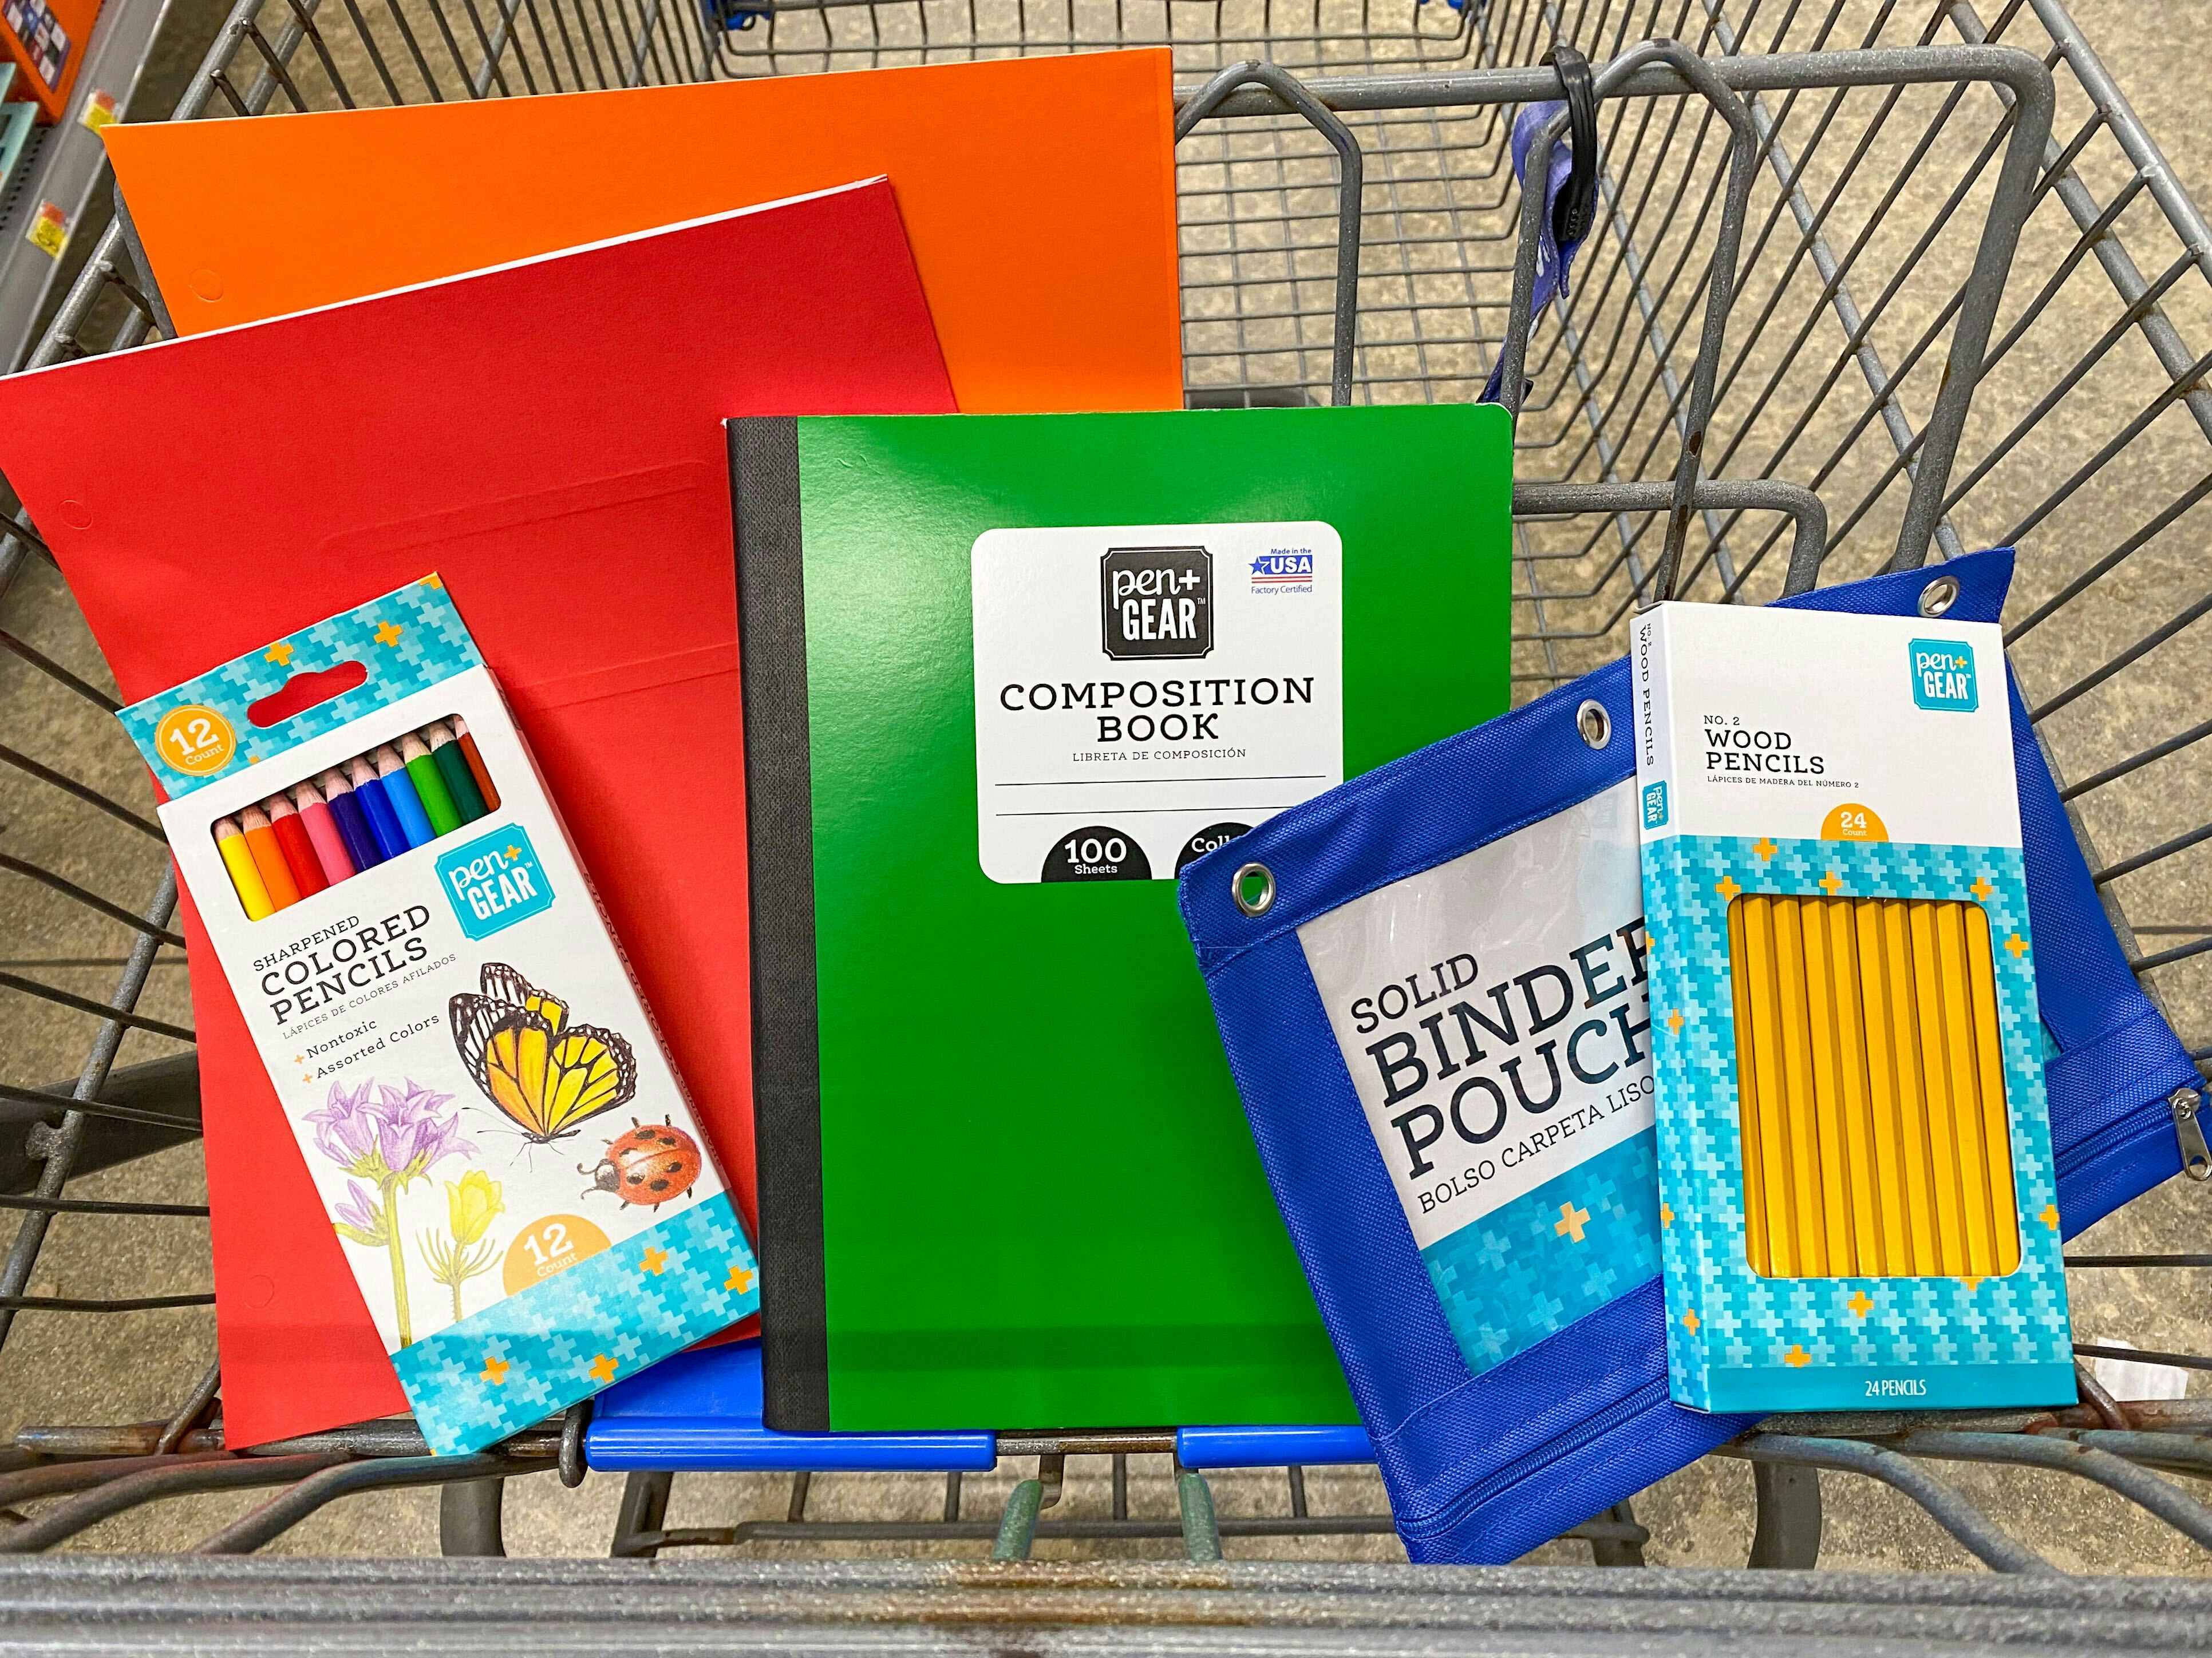 15 Ways to Find Free School Supplies for Teachers and Students